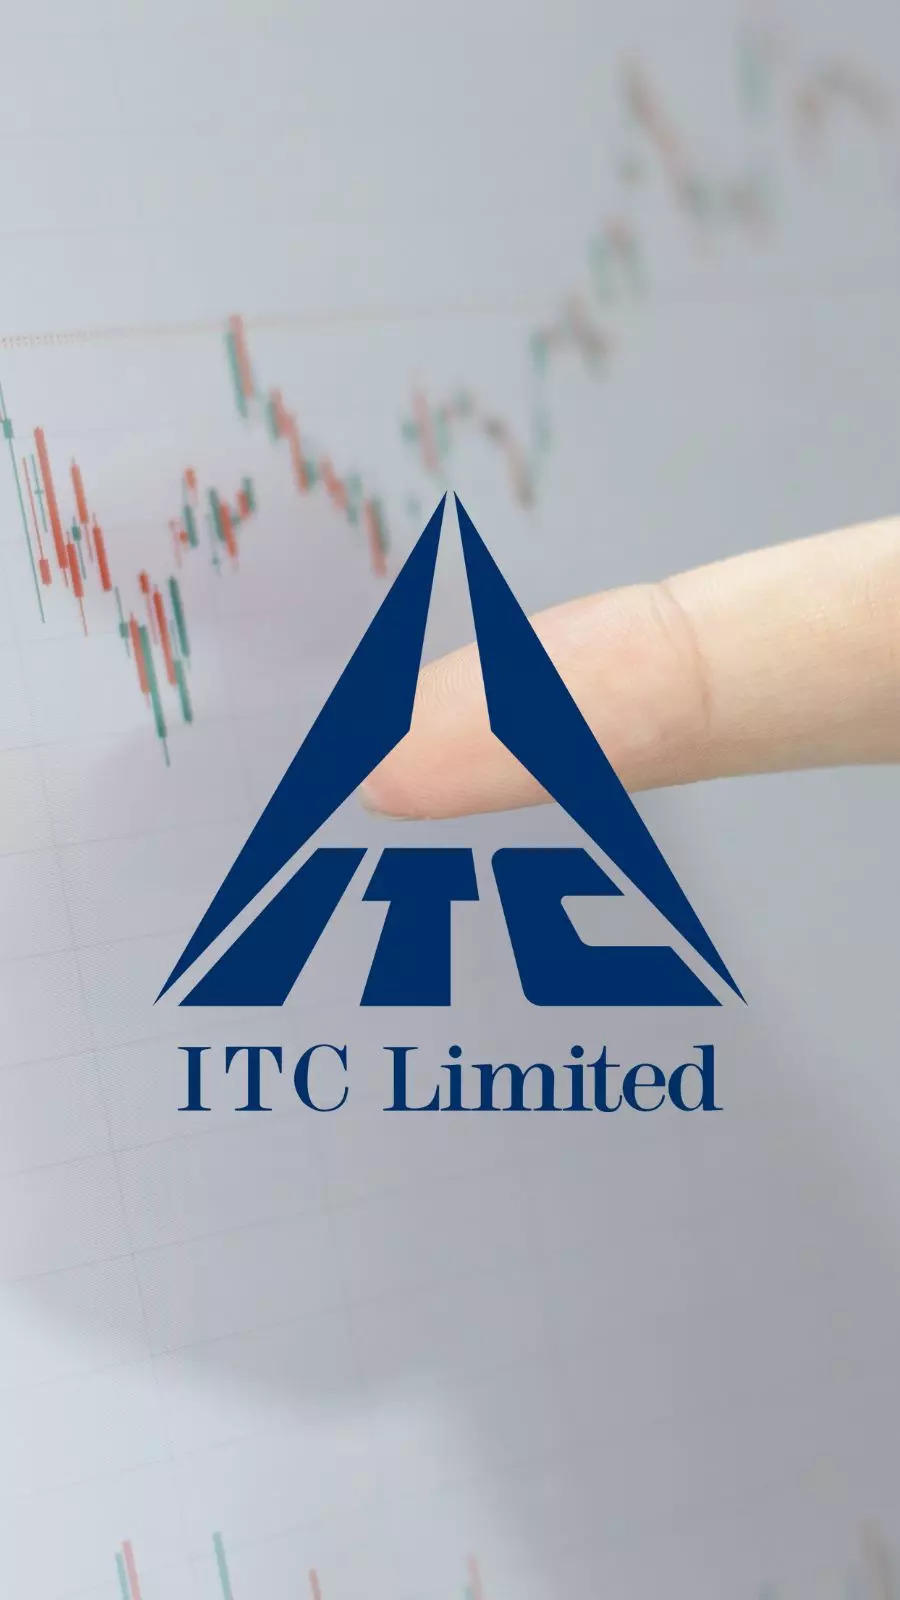 ITC Block Deal: BULLISH! Govt of Singapore, other entities BUY shares of  FMCG firm after BAT stake sale - check share price | Markets News, ET Now